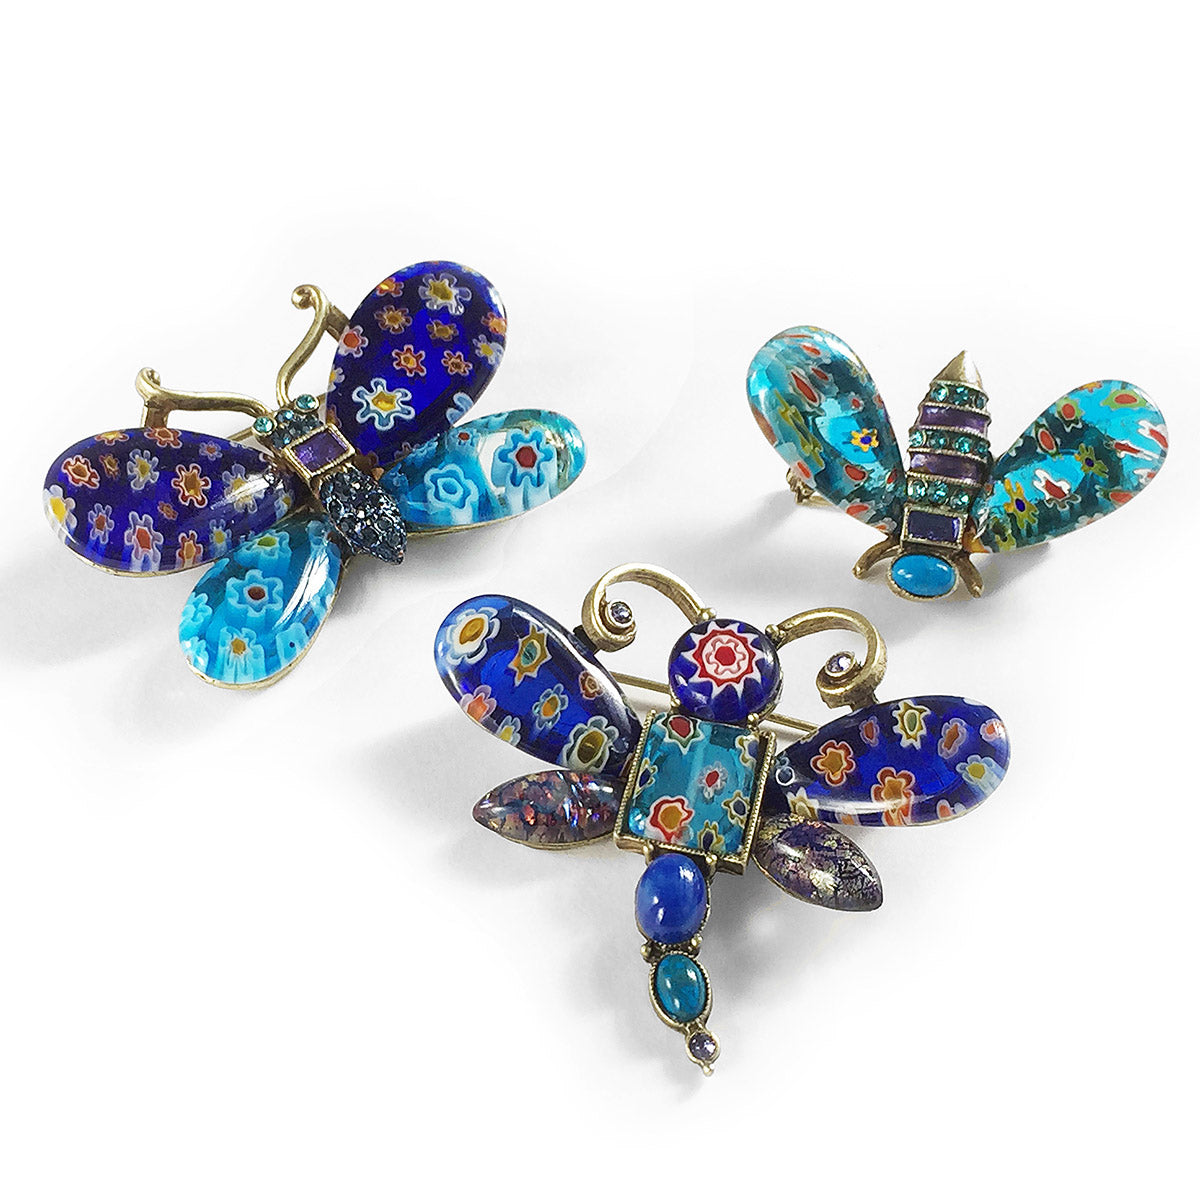 Millefiori Glass Insect Pins Set of 3 Blue Violet